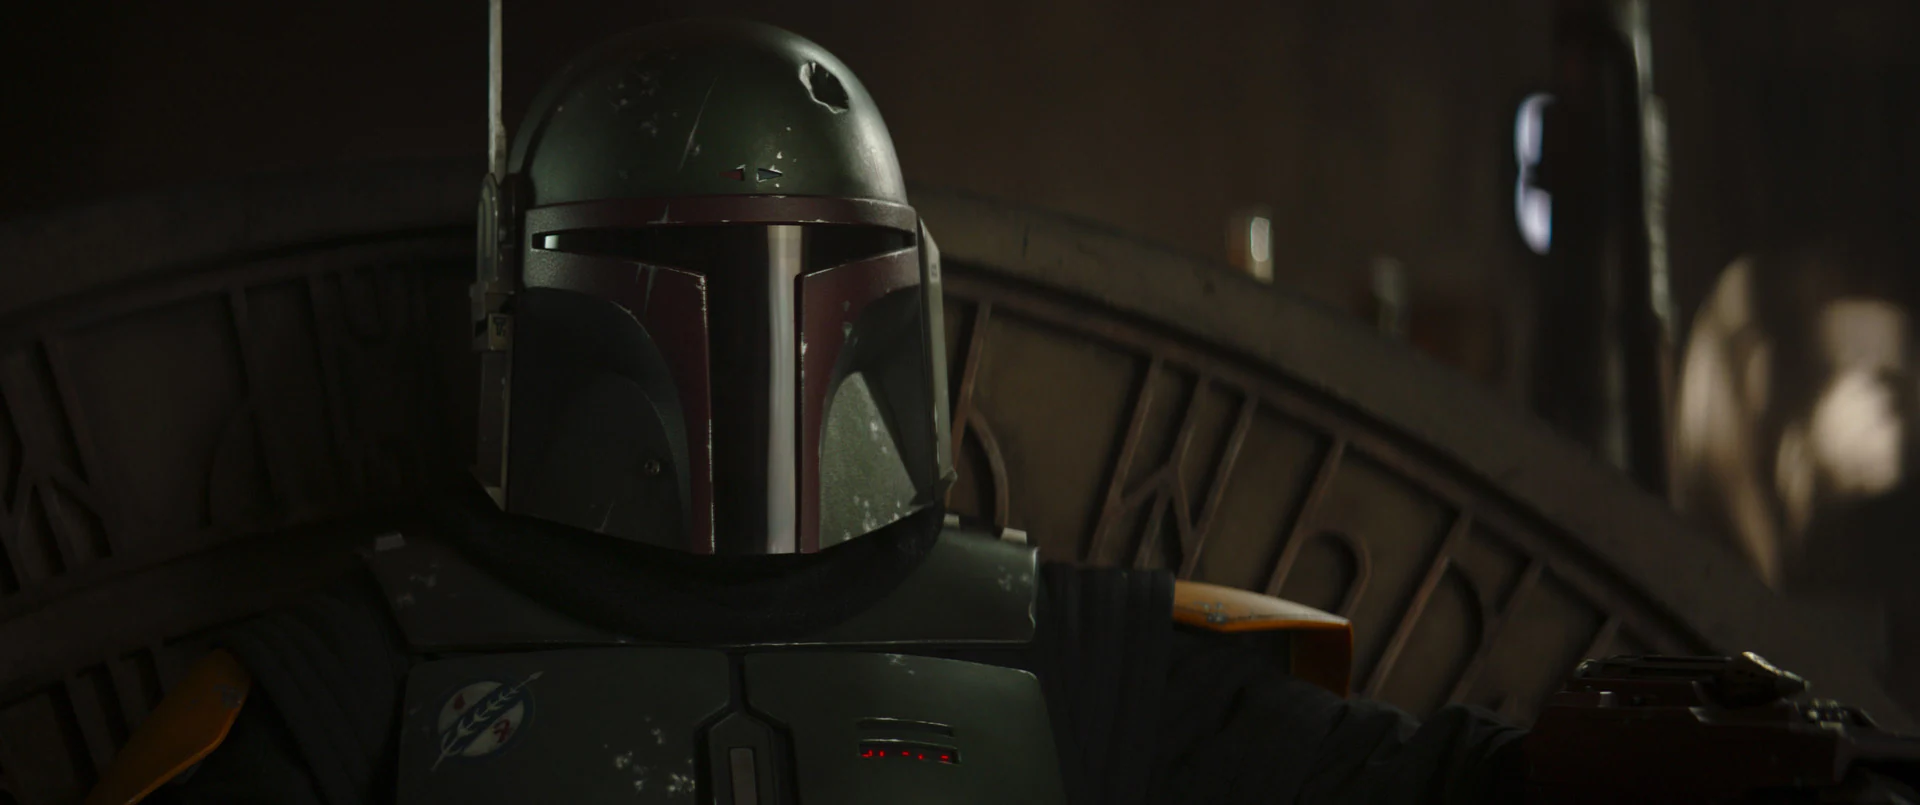 Television Review | The Book of Boba Fett (Season 1)